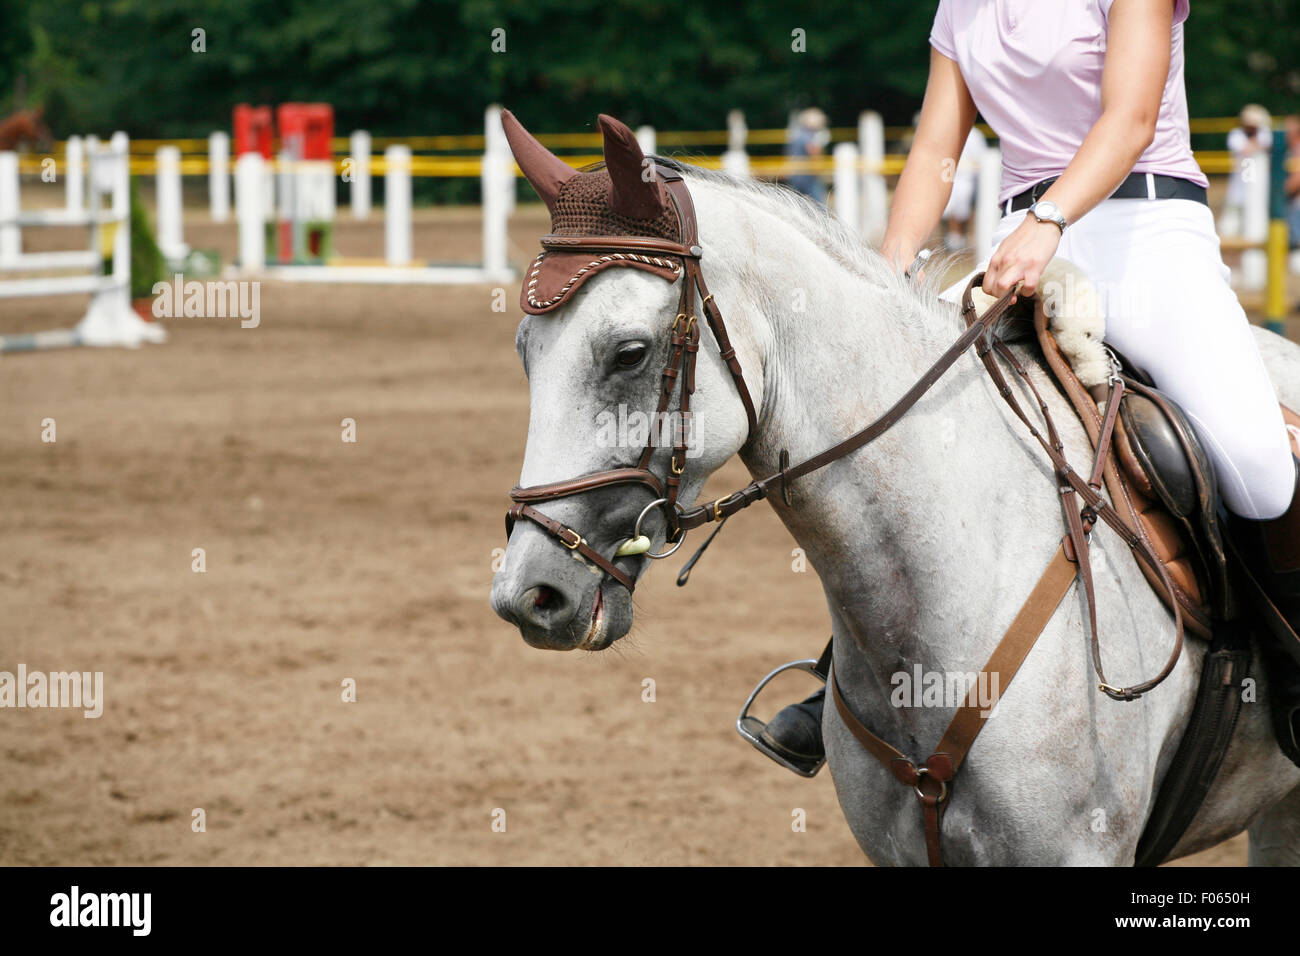 Head-shot of a show jumper horse during competition with jockey Stock Photo